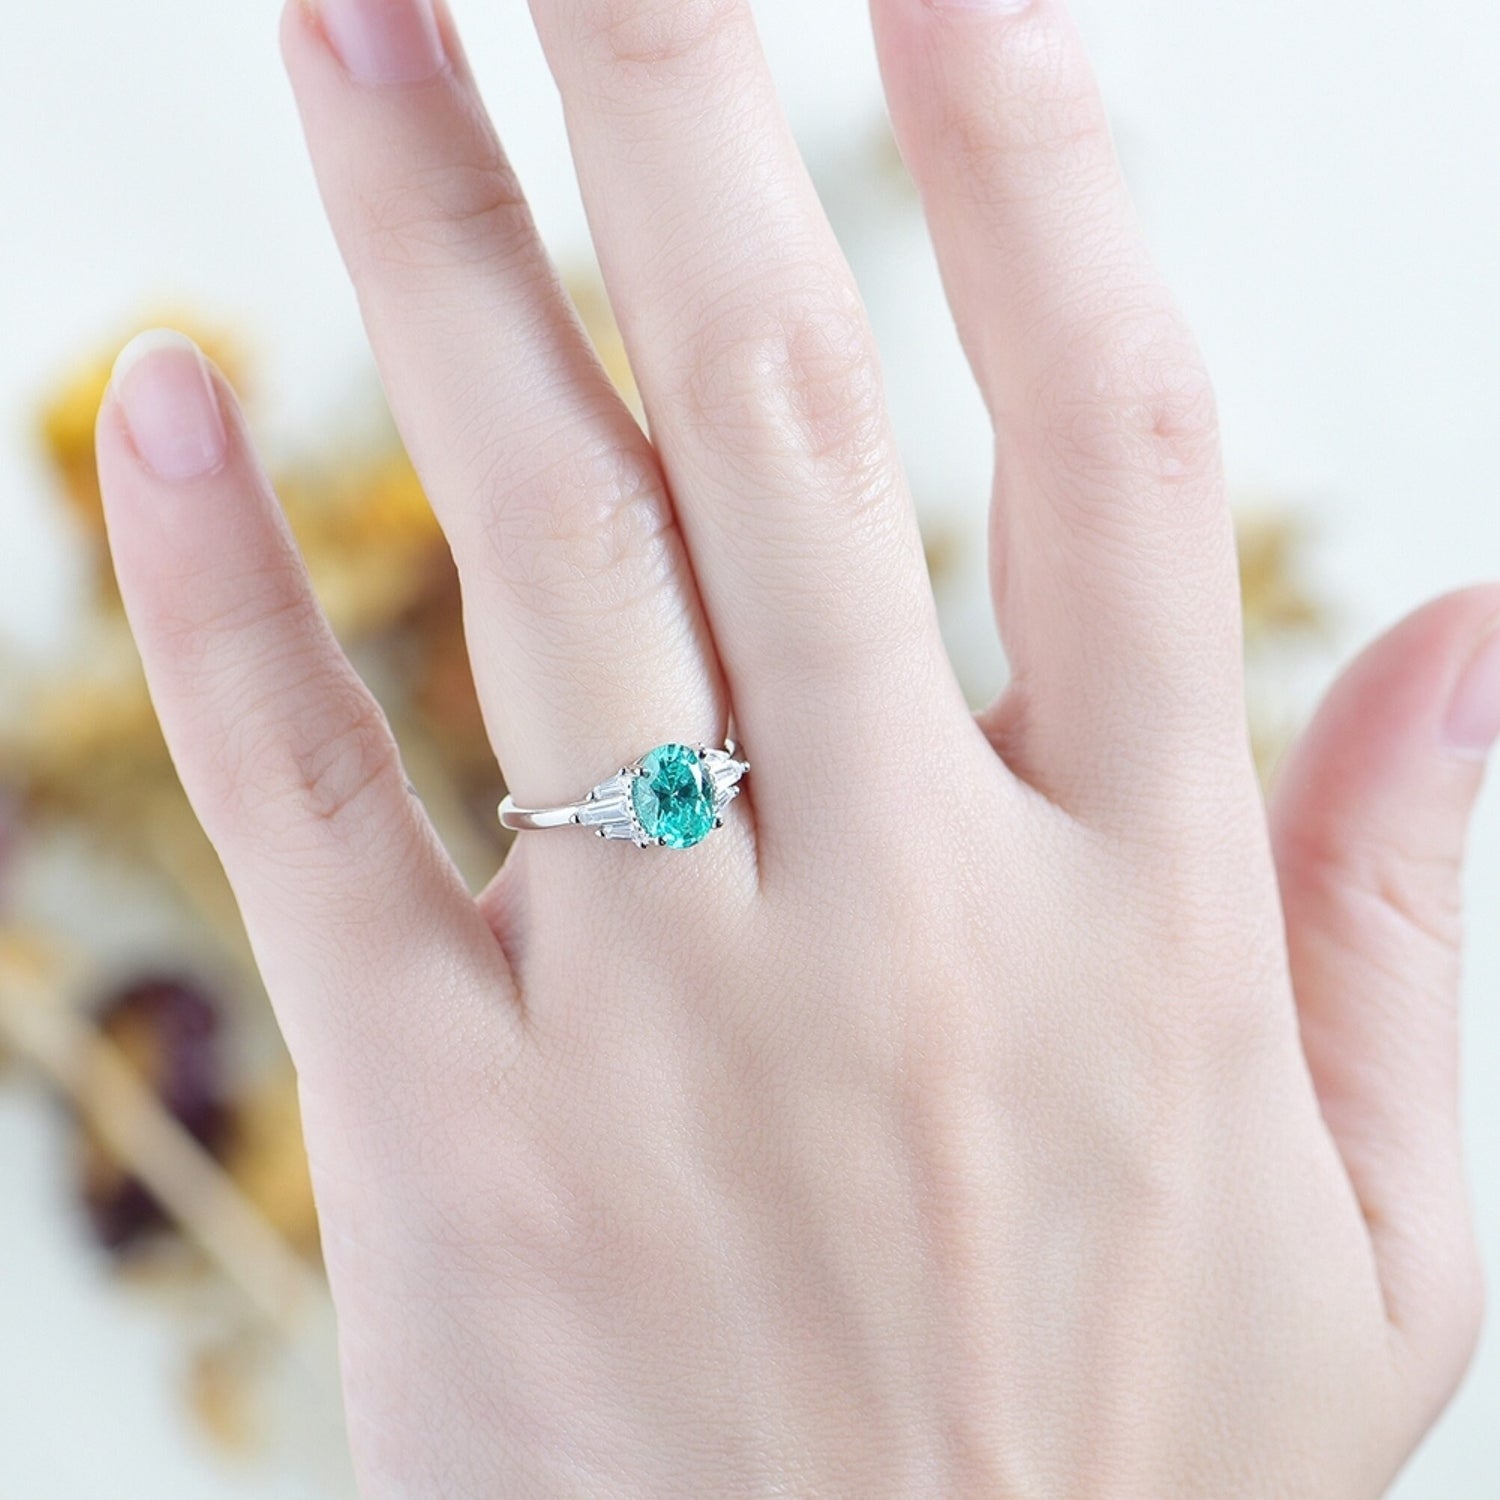 1.5 ct Oval Cut Solitaire Engagement Ring \ Stacking ring \ Silver ring \ Sterling Silver Promise Ring \ Promise Ring \ Topaz Ruby Emerald